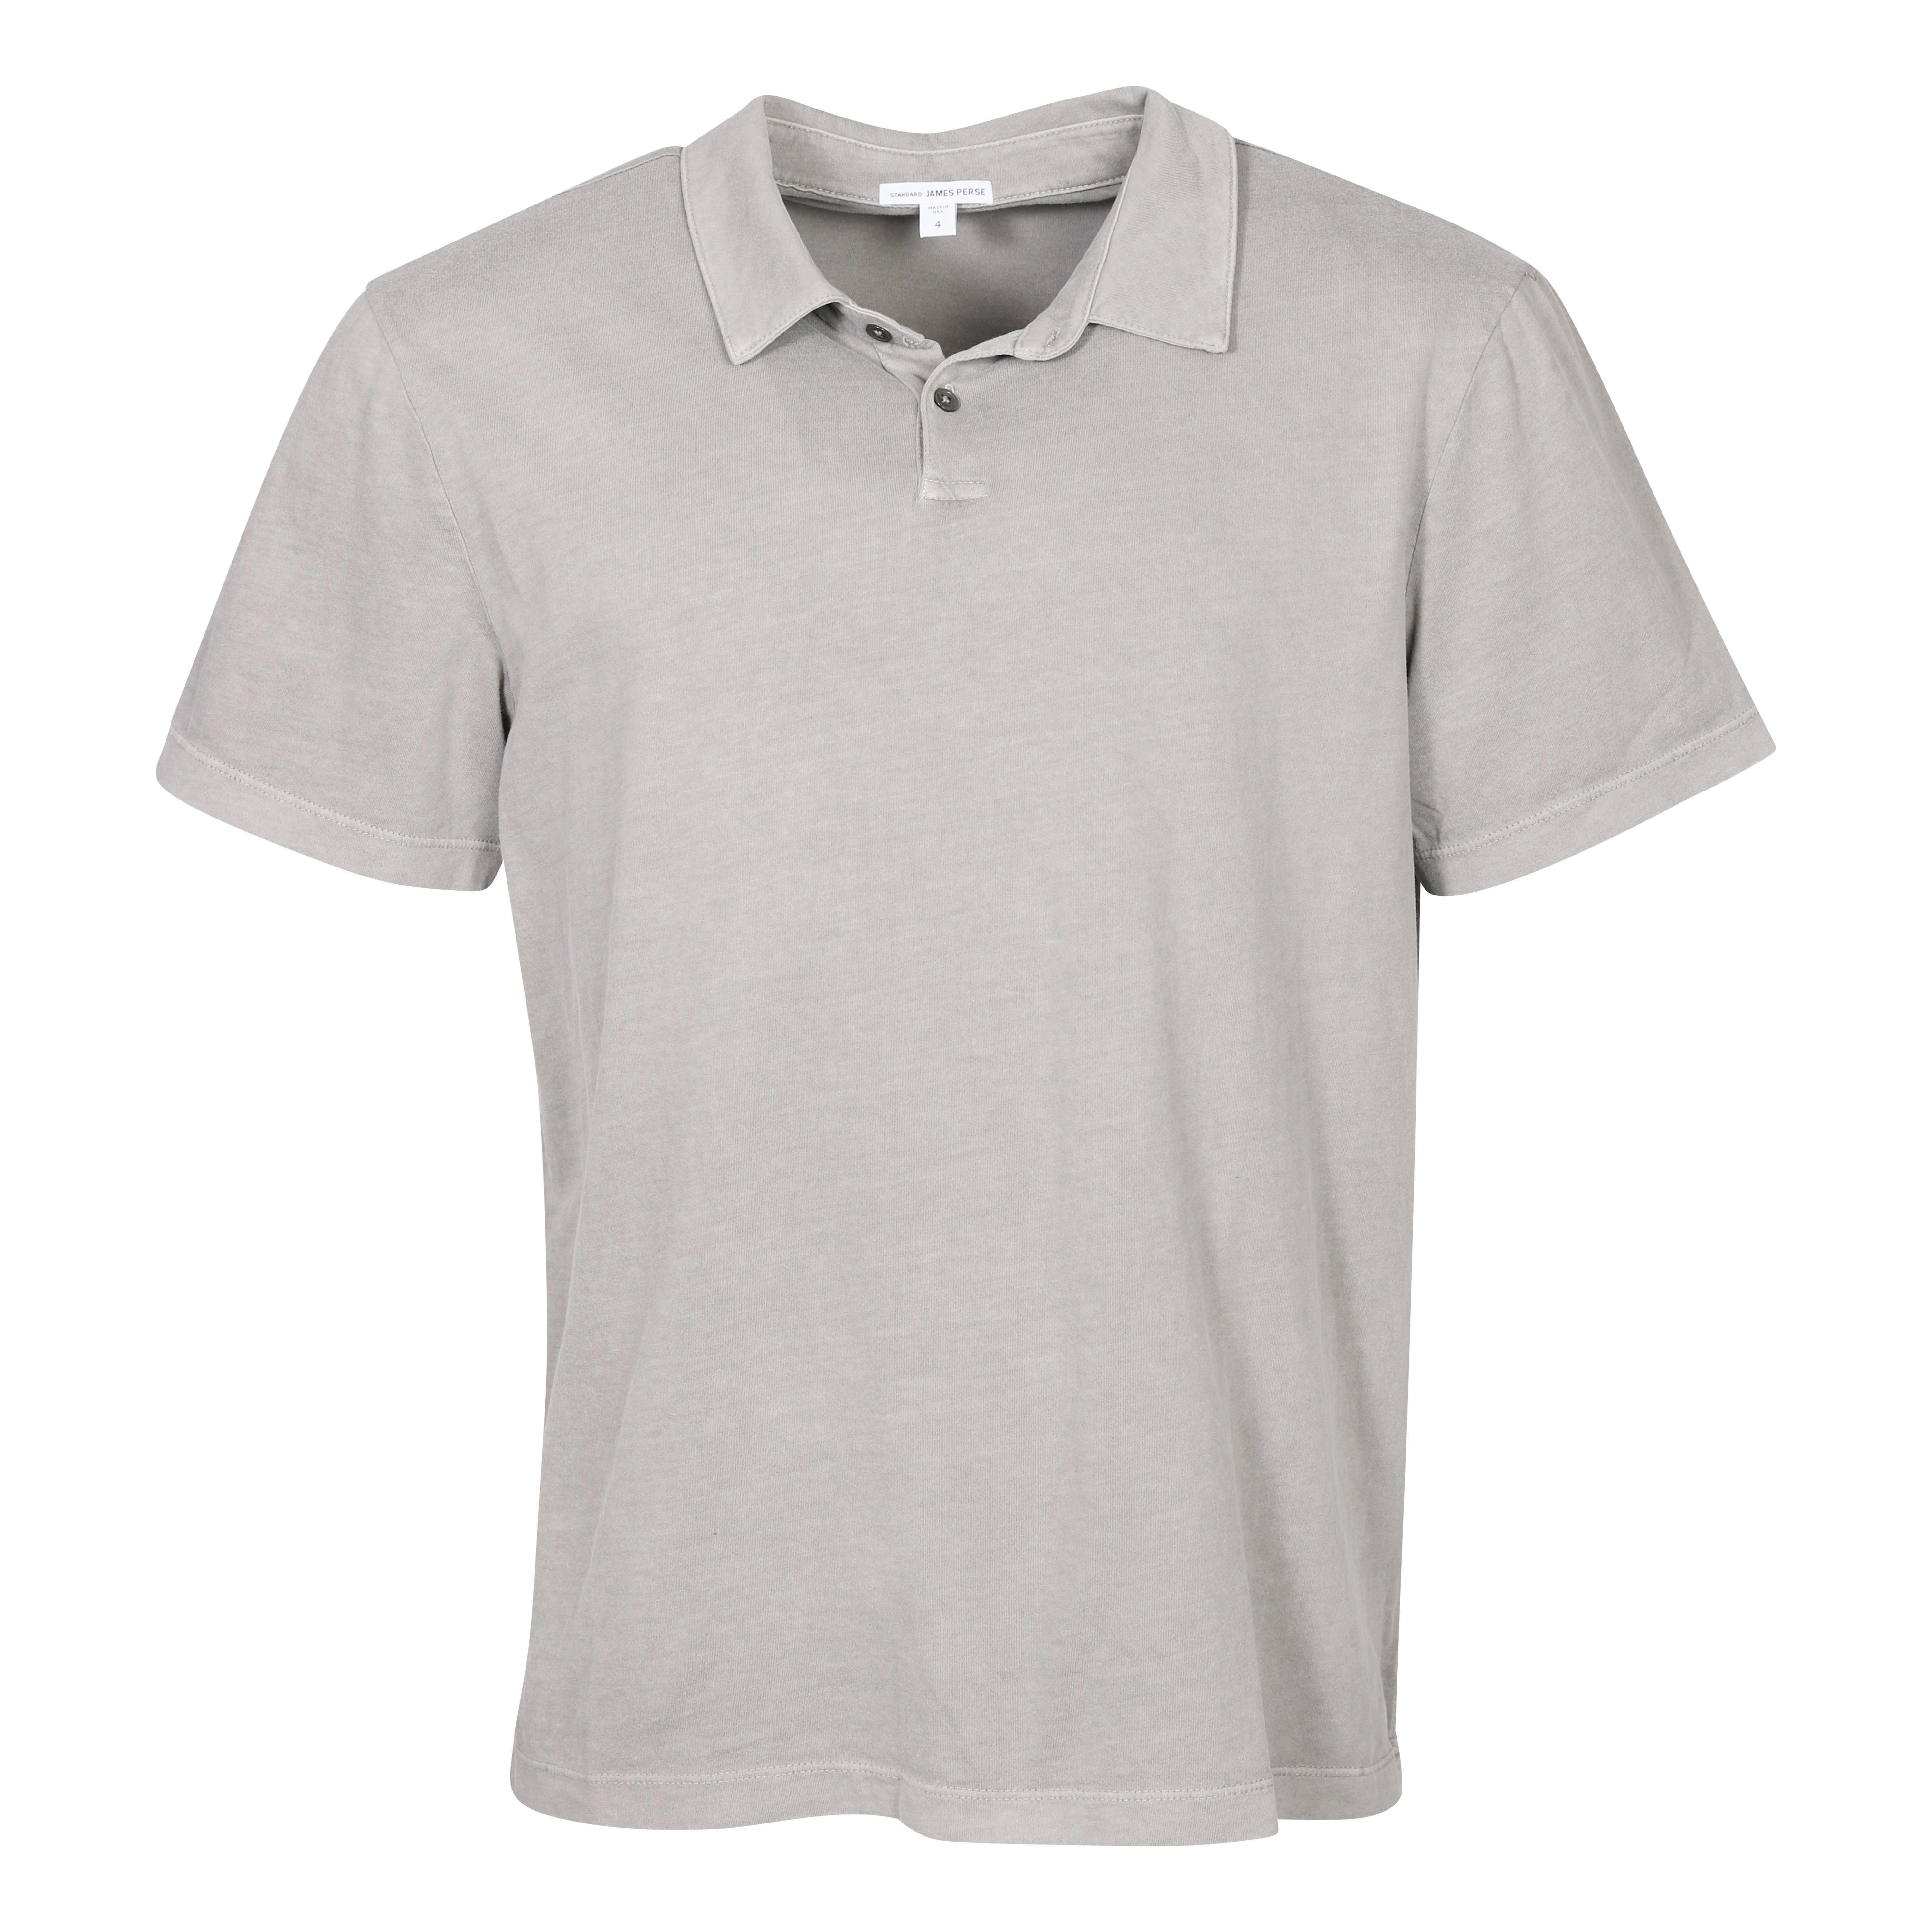 James Perse Standard Polo in Greystone M